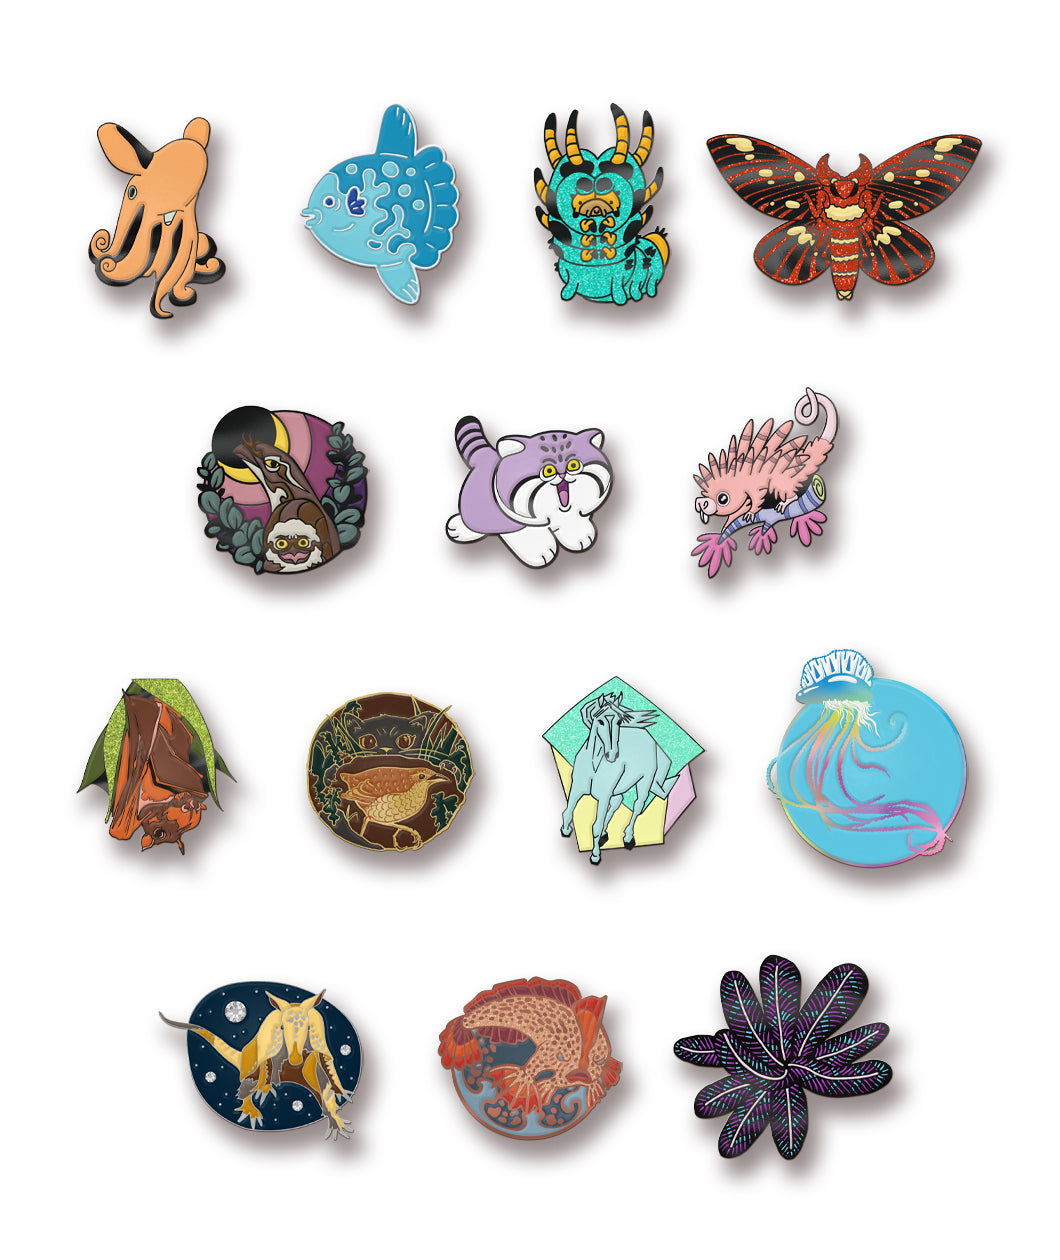 A grid of pins that are each different animals from past Bizarre Beasts designs. They are all part of the Season Zero Pin Set. 